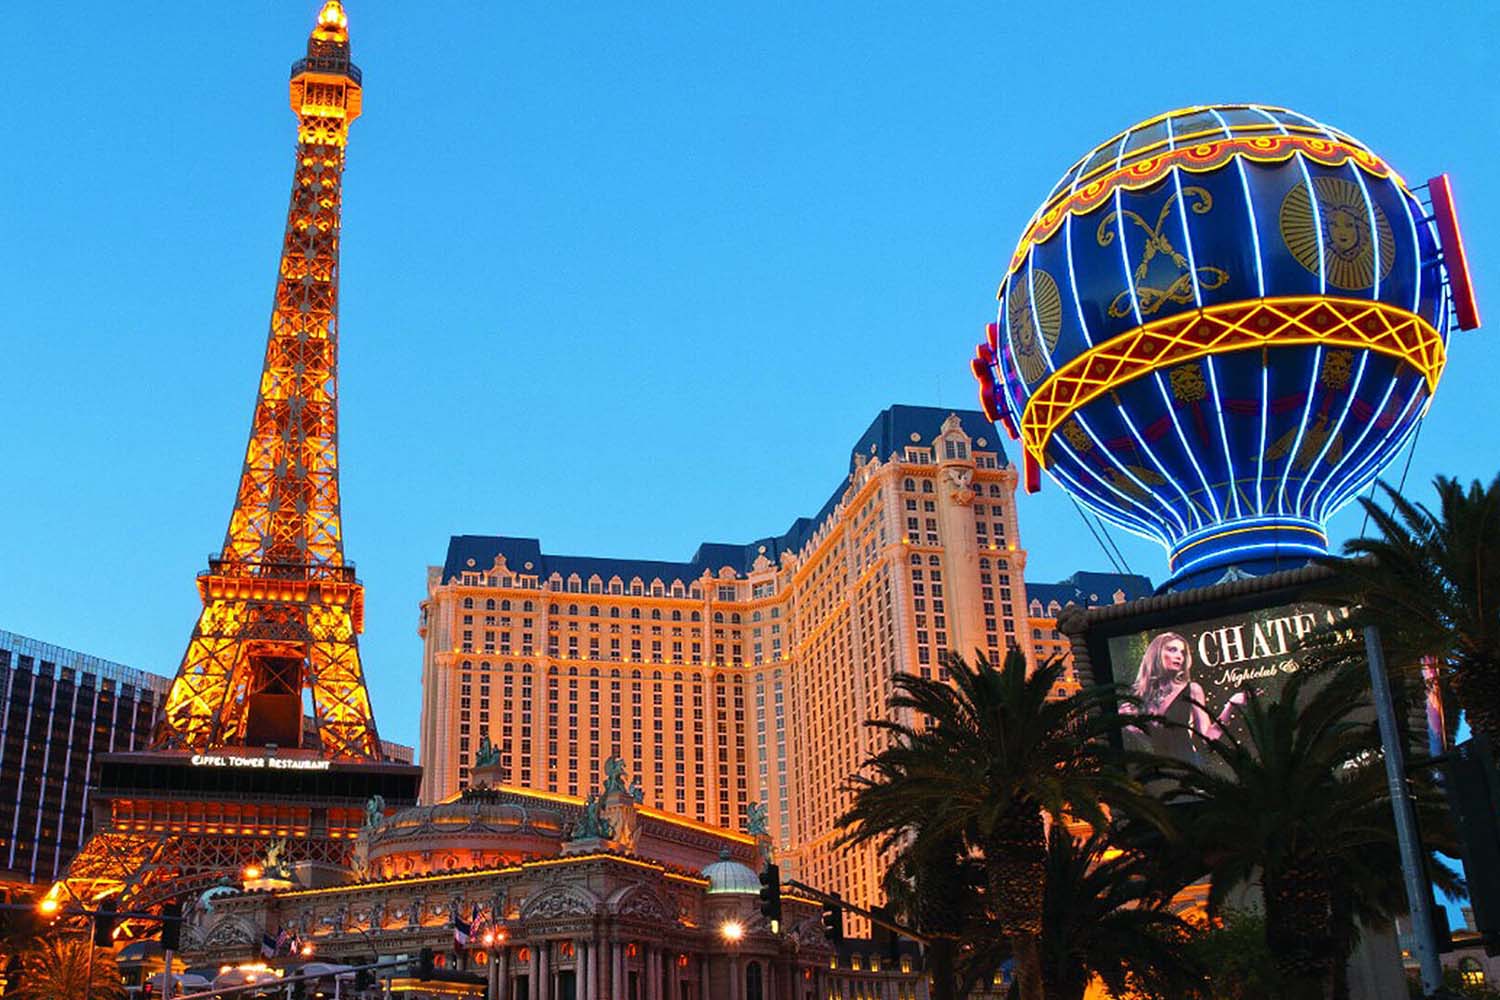 Paris Las Vegas Review: What To REALLY Expect If You Stay